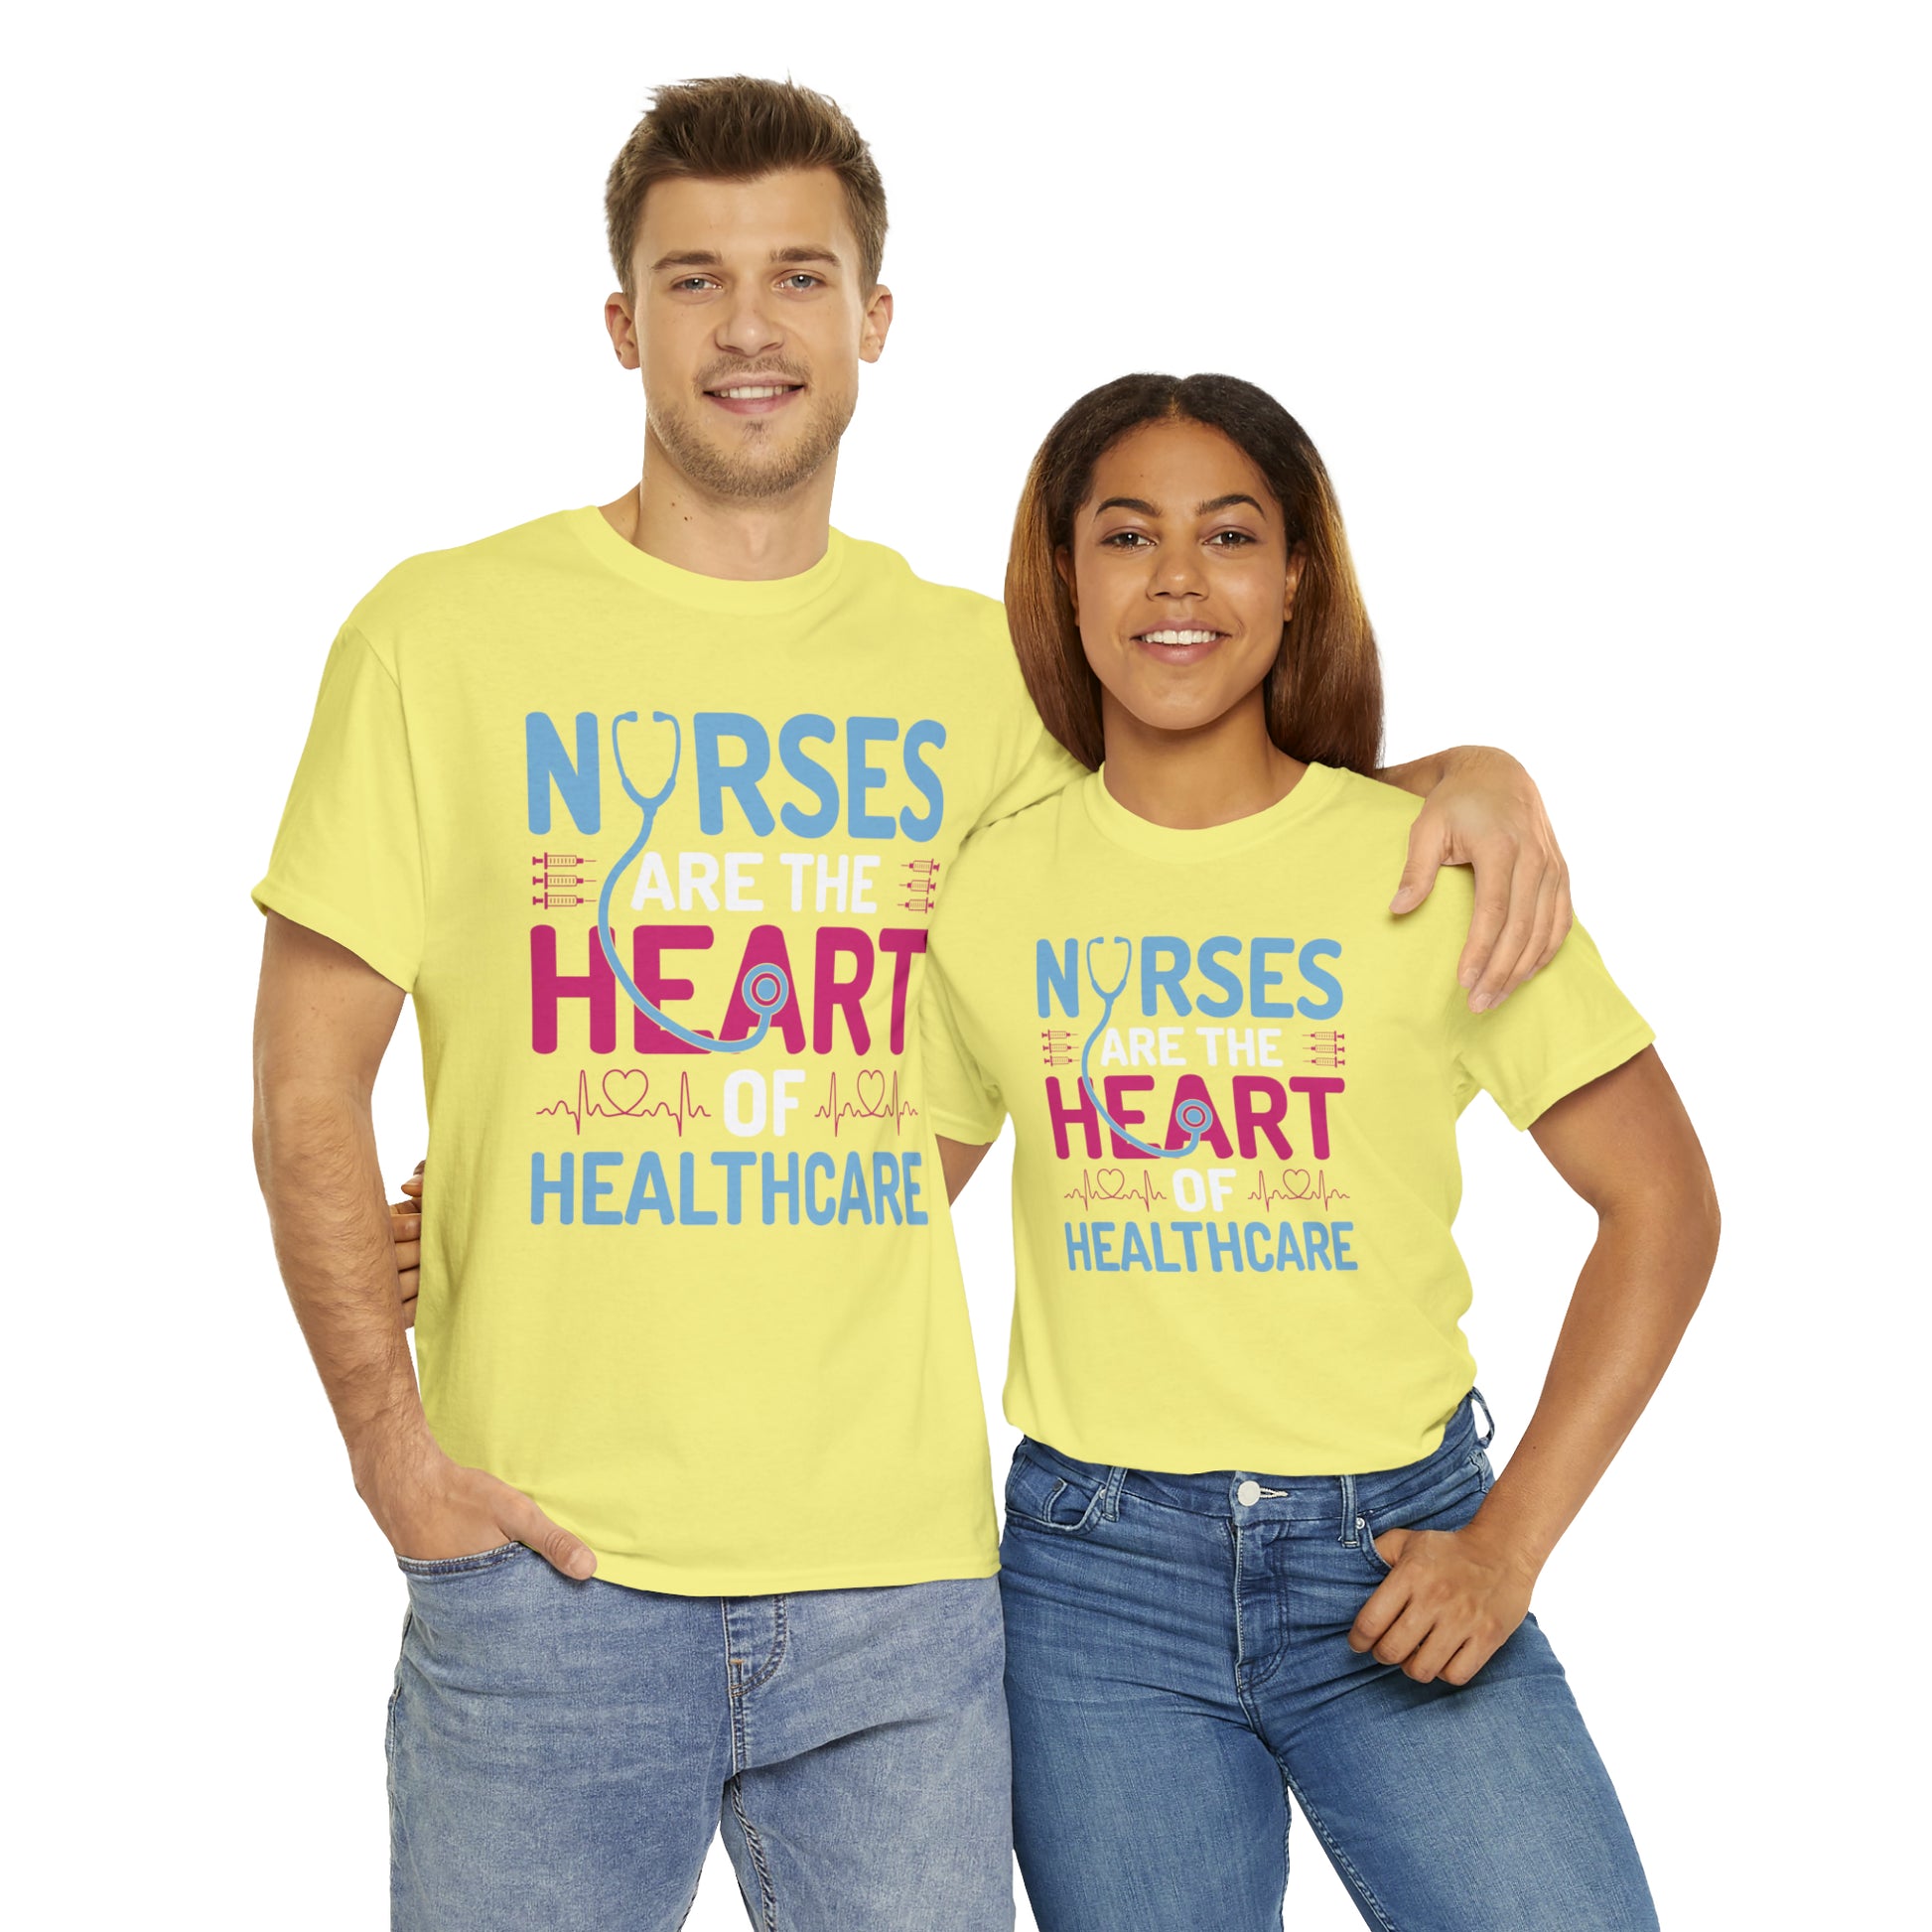 "Nurses Are The Heart Of Healthcare" T-Shirt - Weave Got Gifts - Unique Gifts You Won’t Find Anywhere Else!